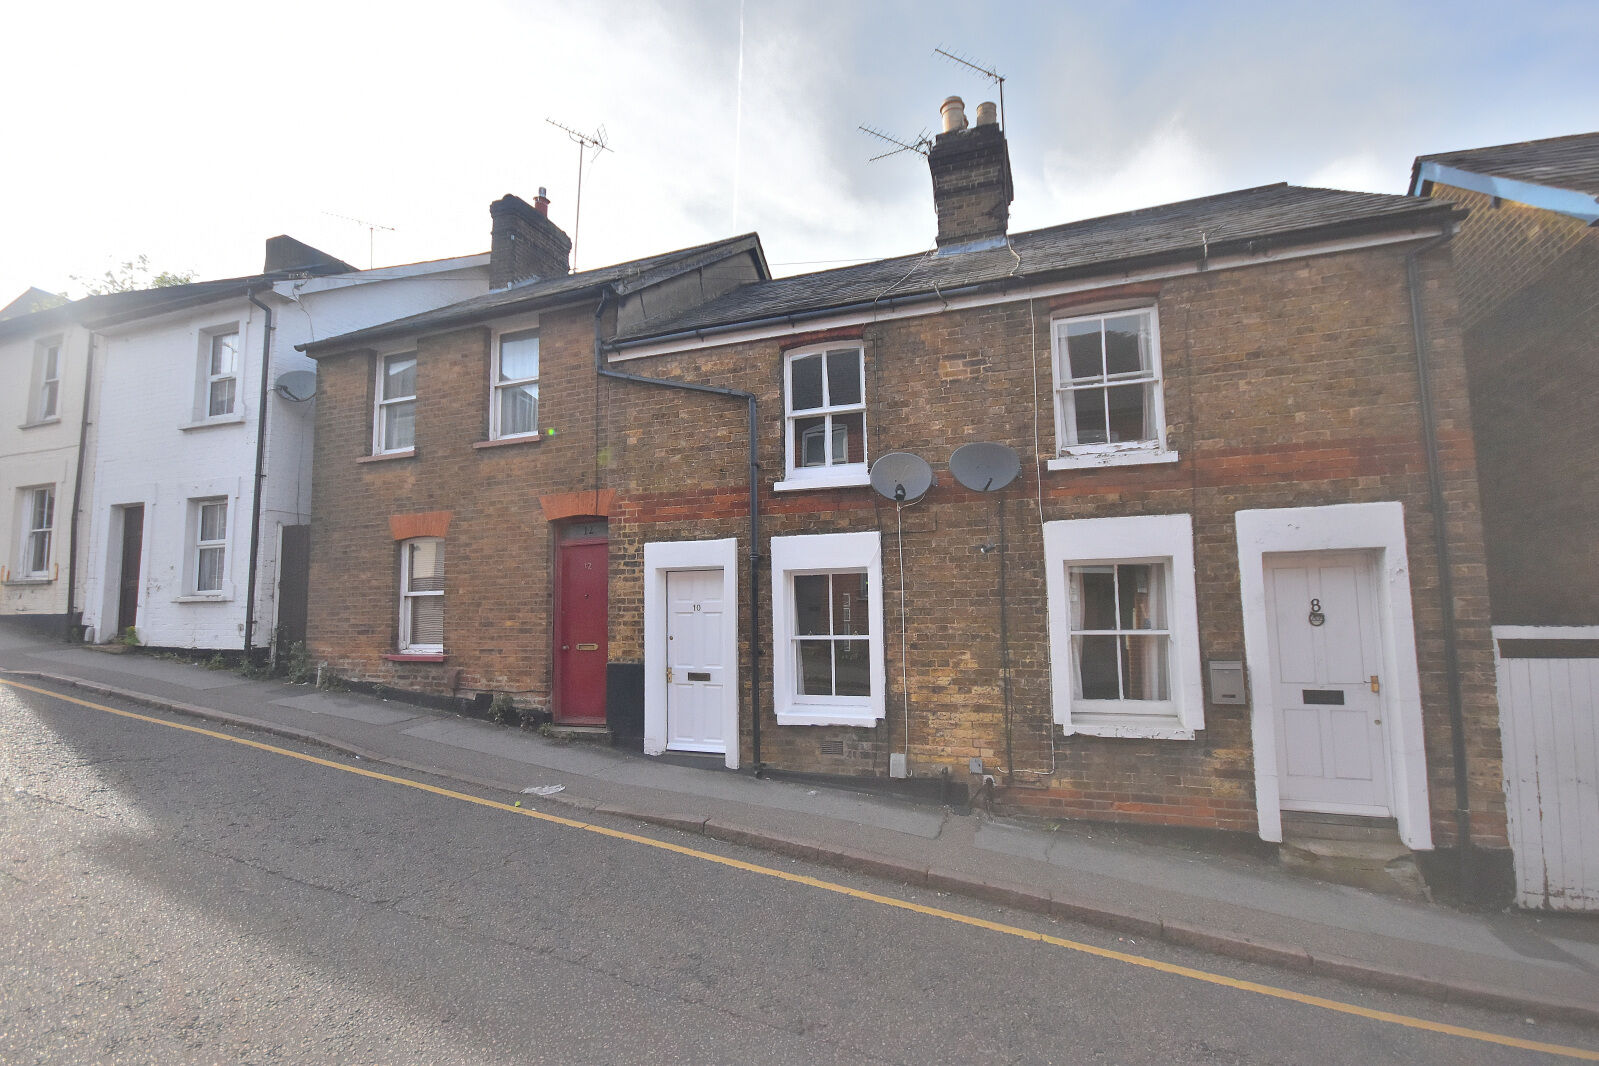 2 bedroom mid terraced property to rent, Available unfurnished from 28/06/2025 New Town Road, Bishop's Stortford, CM23, main image